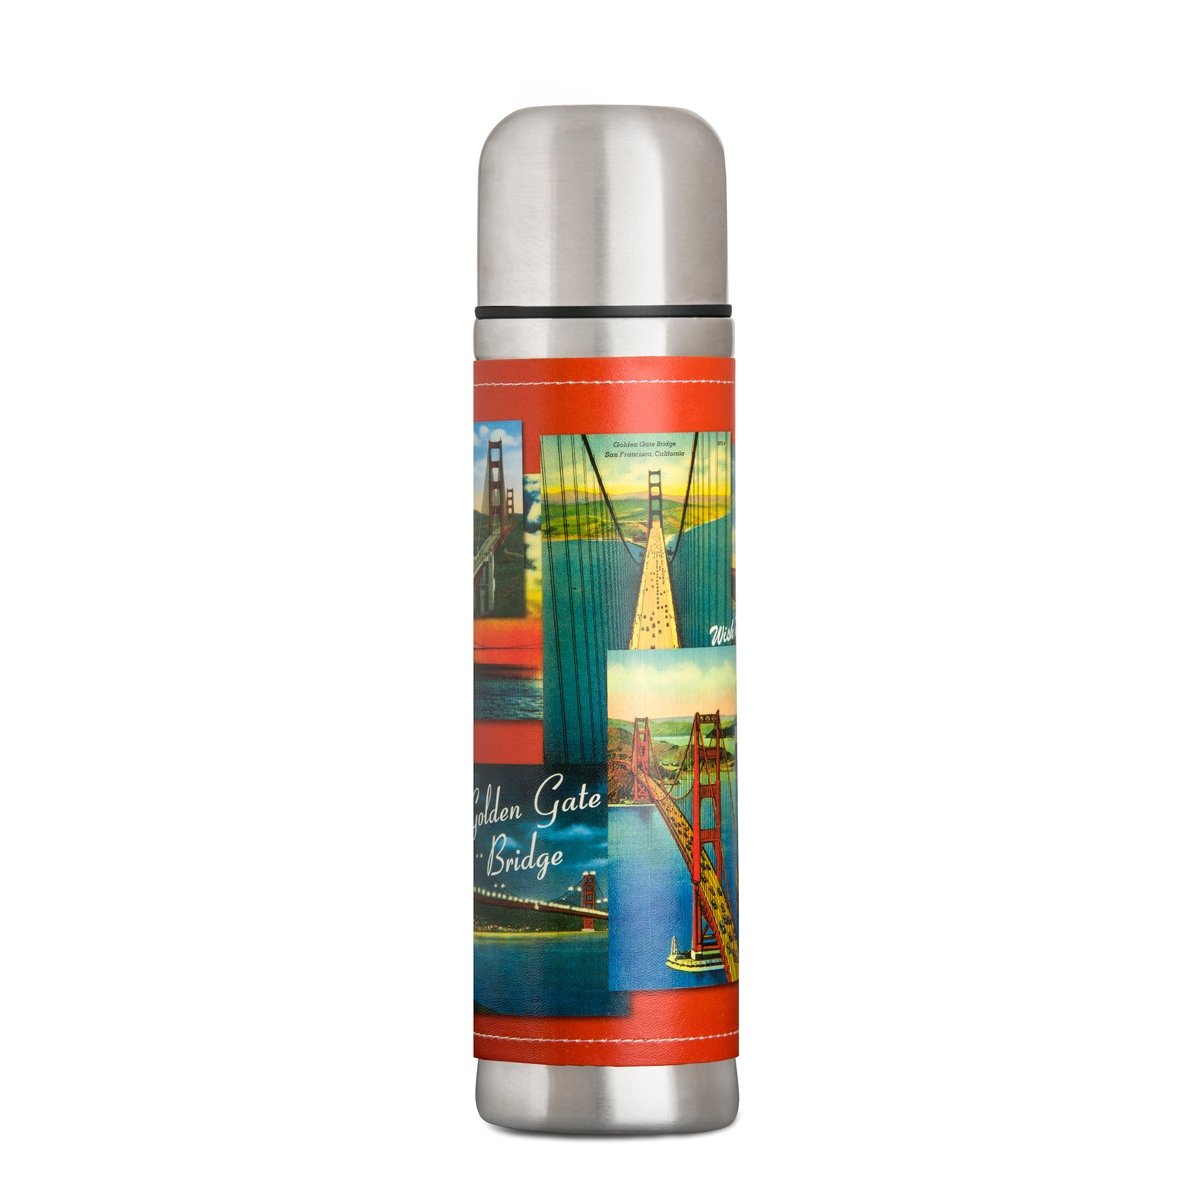 Stainless steel thermos with brightly colored printed sleeve, featuring colorful vintage illustrations of the Golden Gate Bridge.